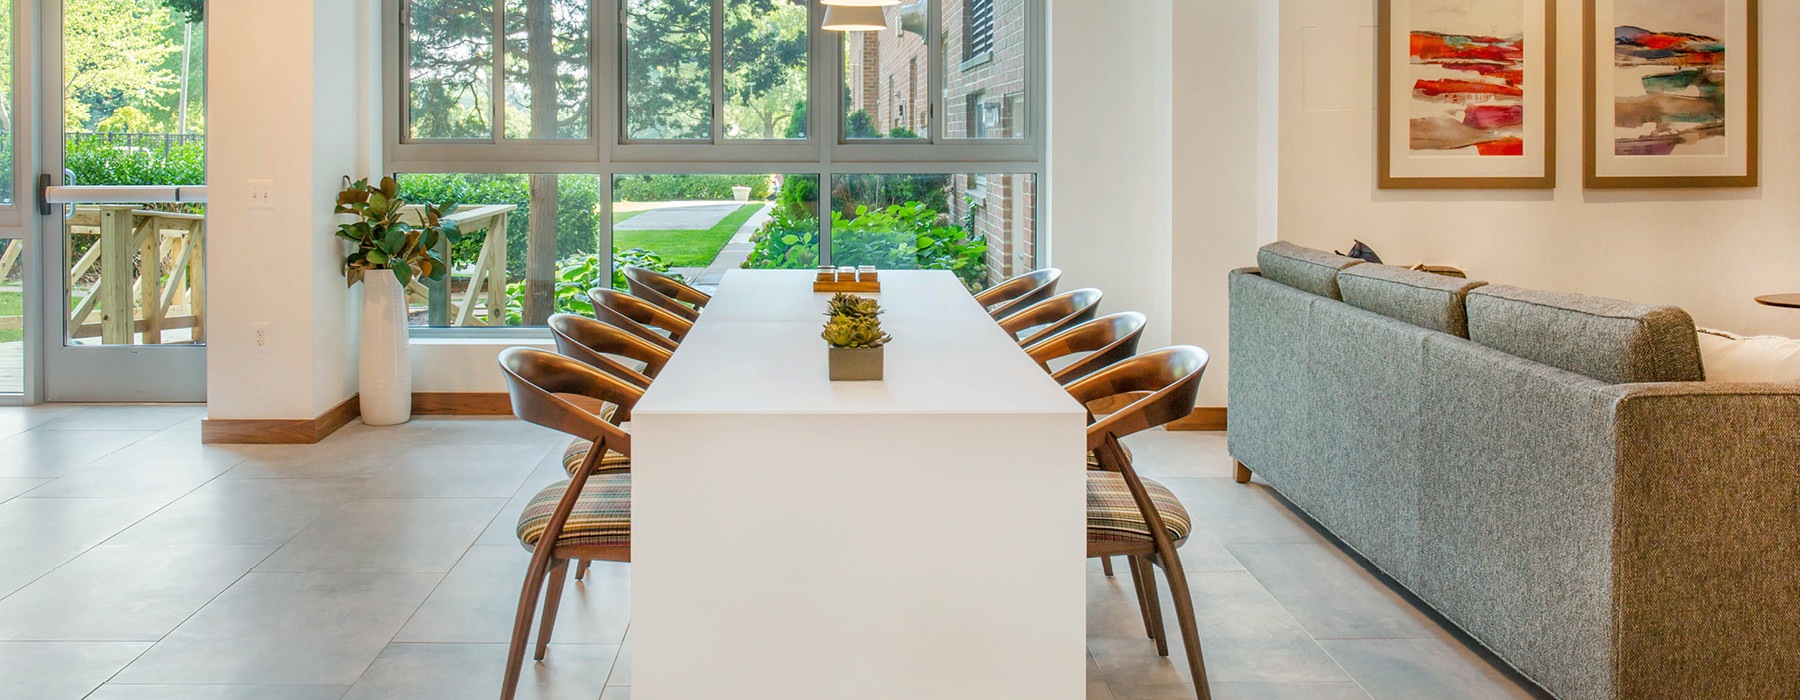 Dining room or conference table in common area of our Arlington apartment. White table with gold chairs.